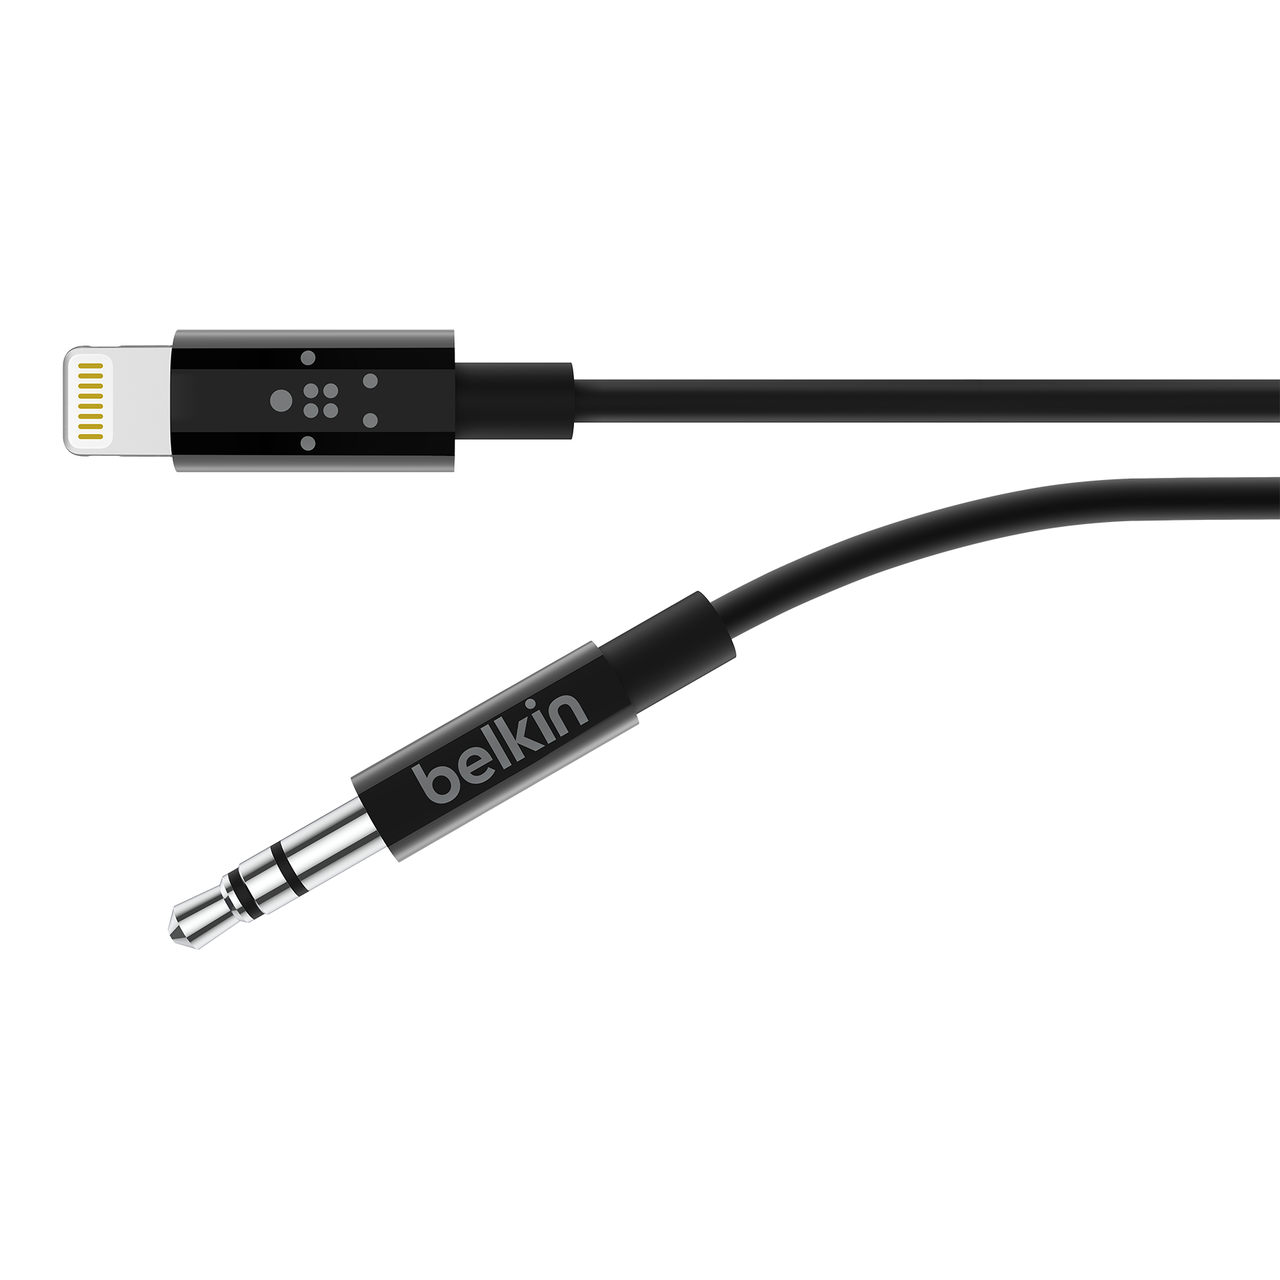 Belkin 3.5 mm Audio Cable With Lightning Connector in Black